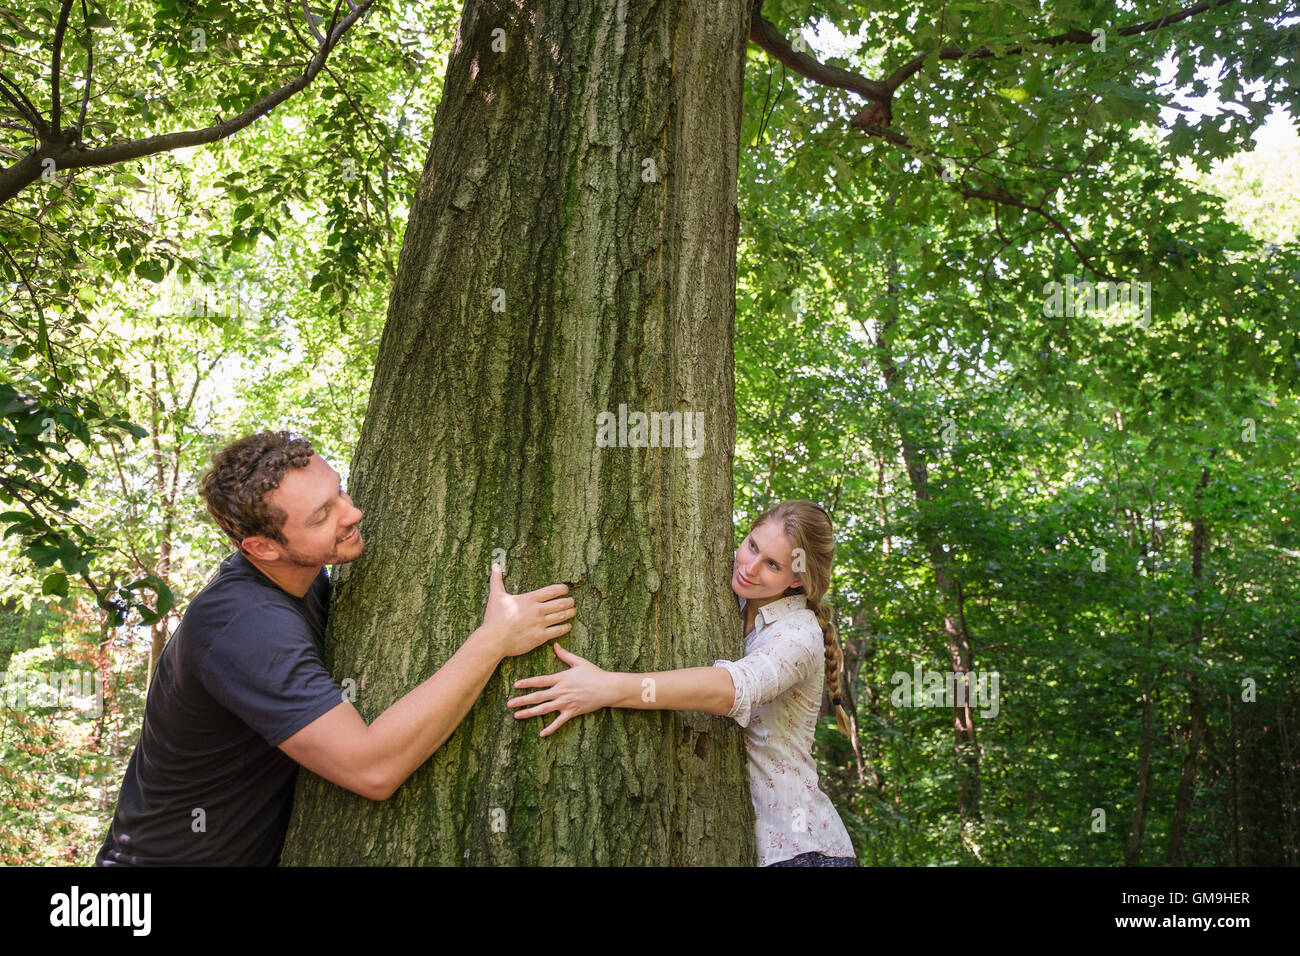 Couple hugging tree Banque D'Images